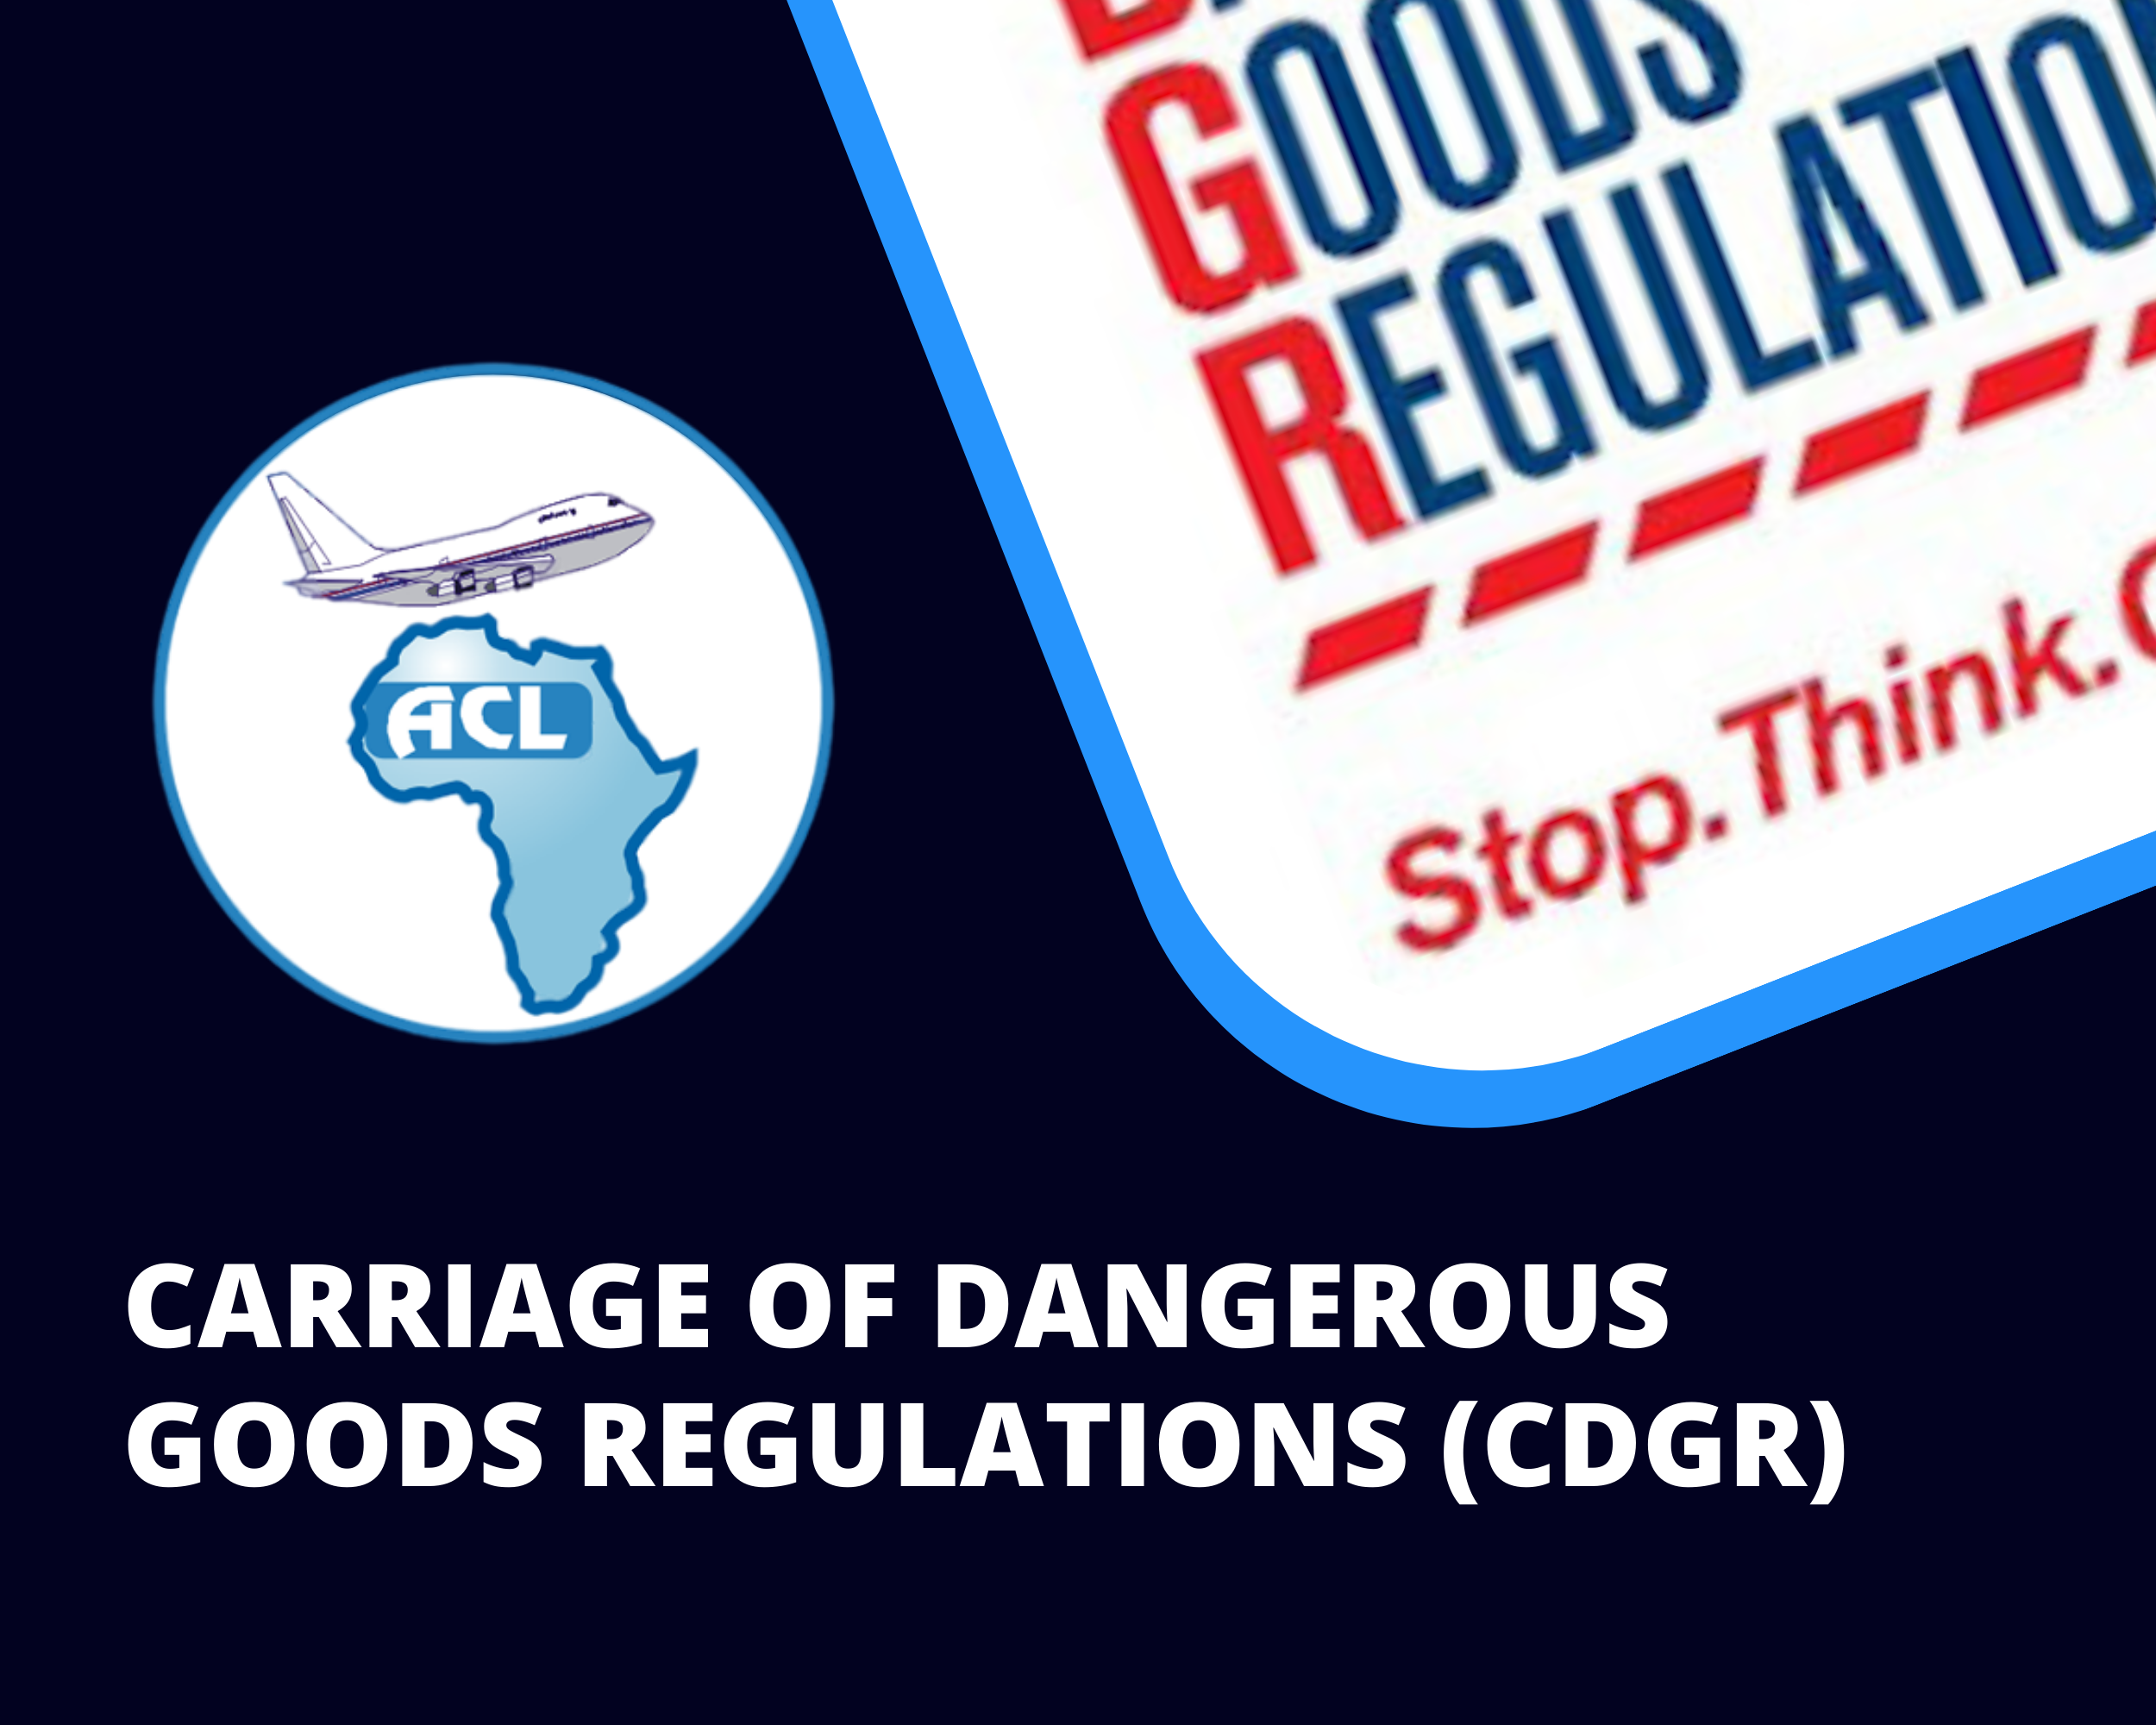 CARRIAGE OF DANGEROUS GOODS REGULATIONS (CDGR)